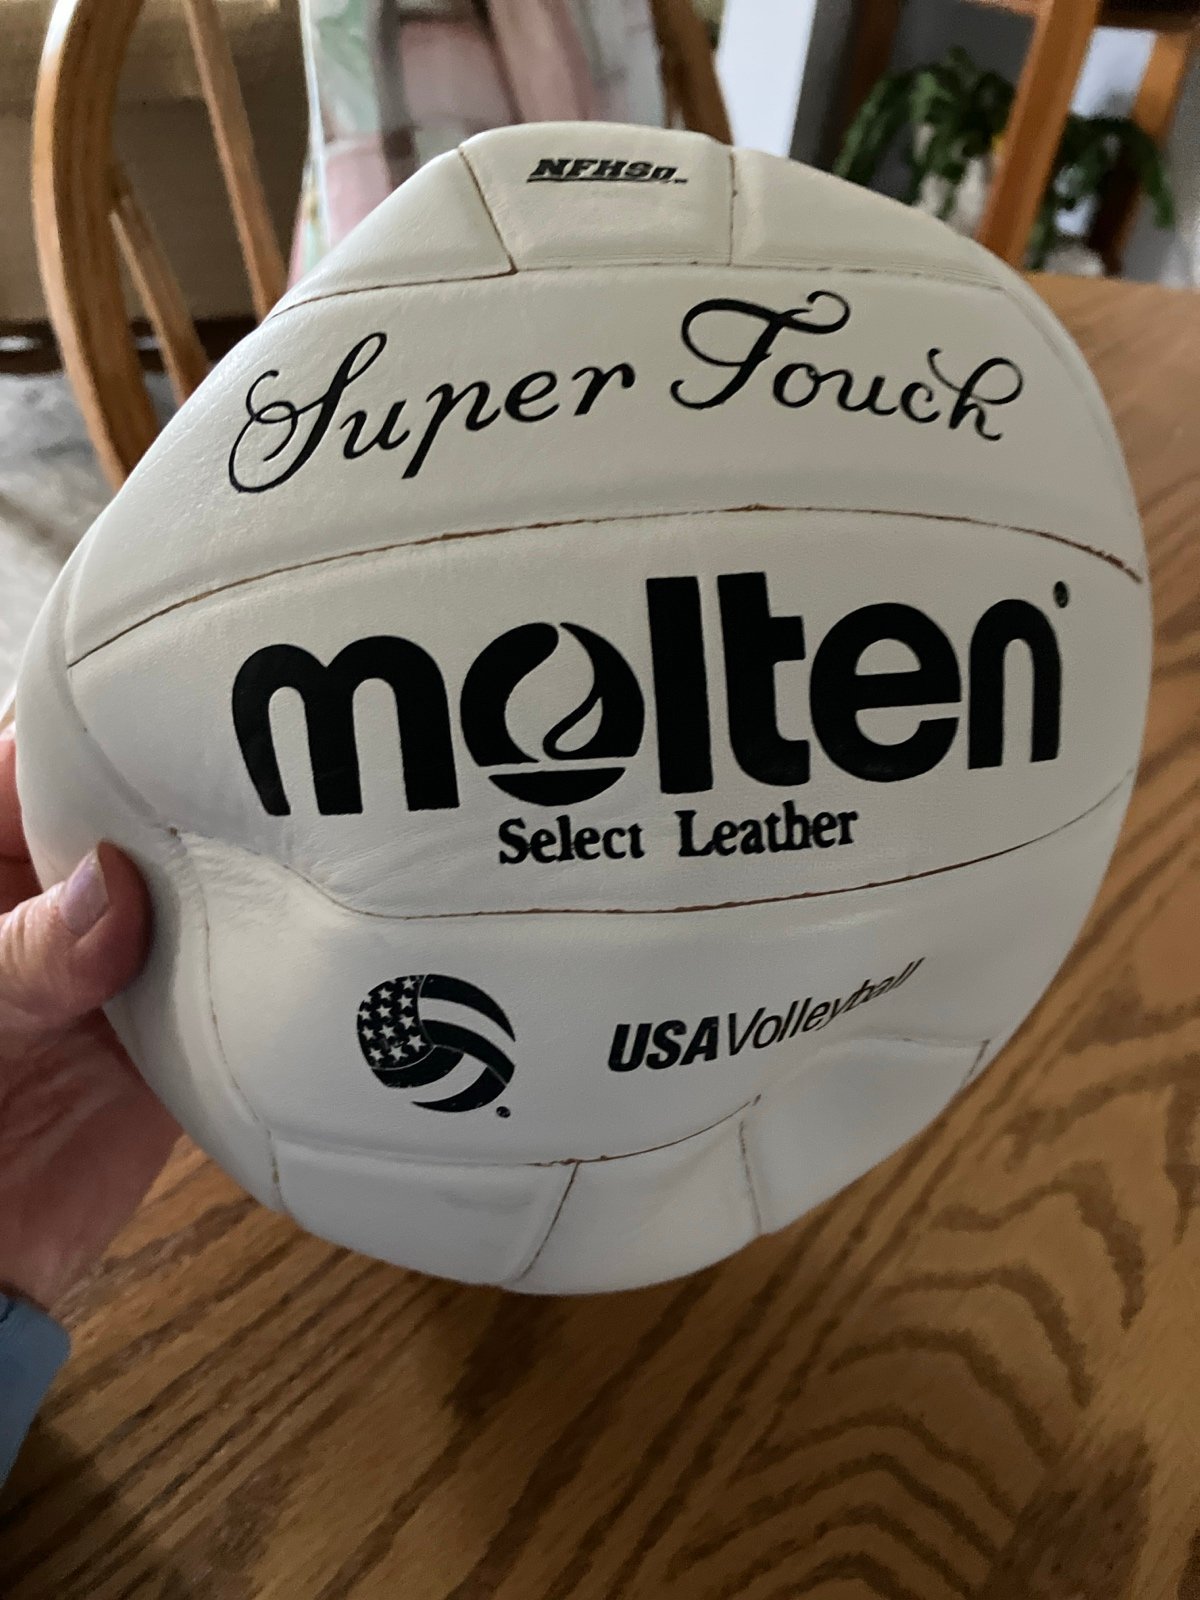 Brand new volleyball P2E8K4pTS